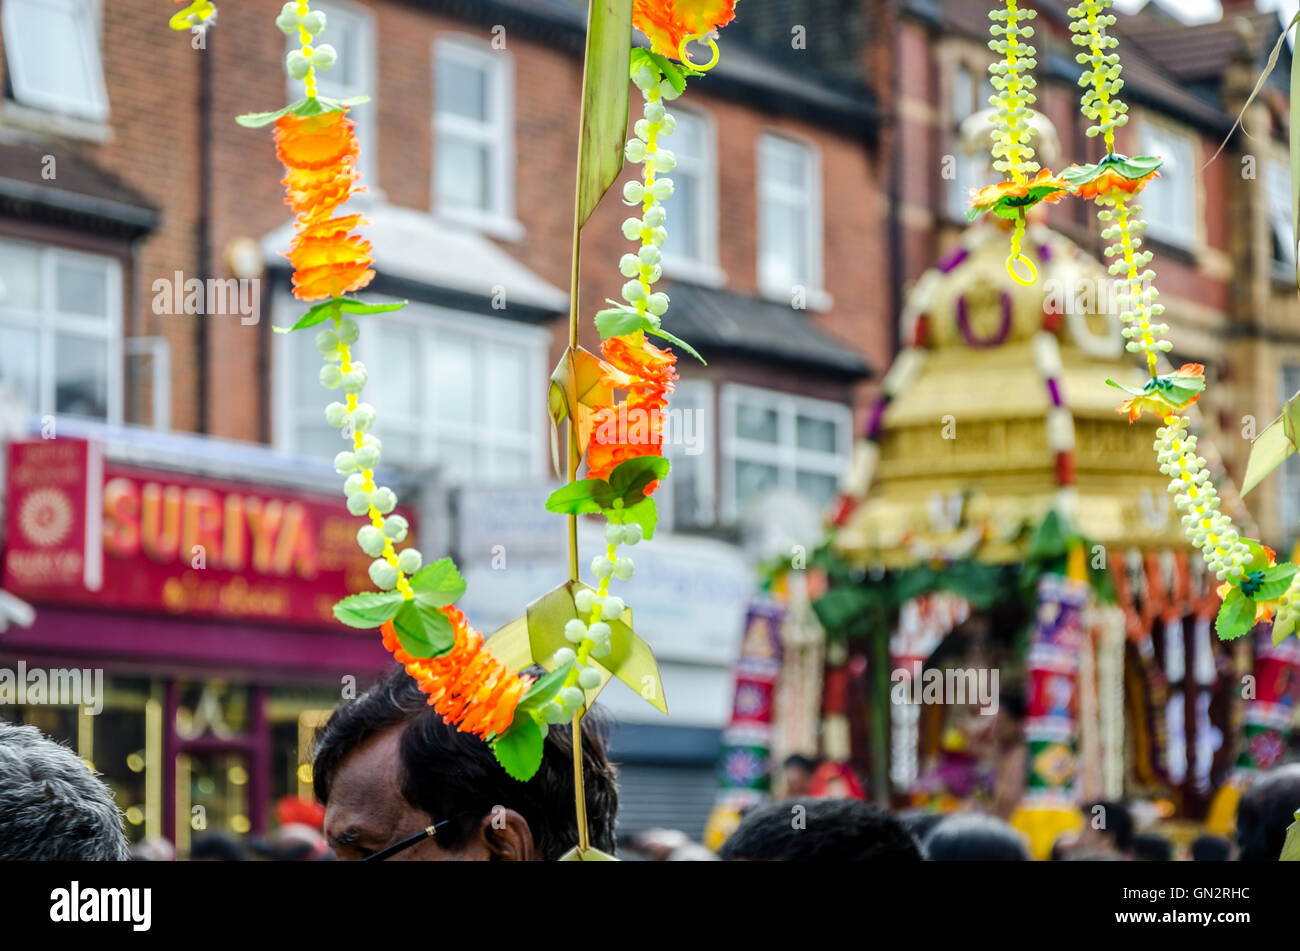 London, UK. 28 August 2016 The annual chariot festival organised by the London Sri Mahalakshmi Temple Brahmothsavam took place in east London. The chariot is pulled through the streets of east London in a pre-arranged route. Along the route blessings are given, coconuts are split and trumpets/drums are blown/drummed.  Credit:  Ilyas Ayub/ Alamy Live News Stock Photo